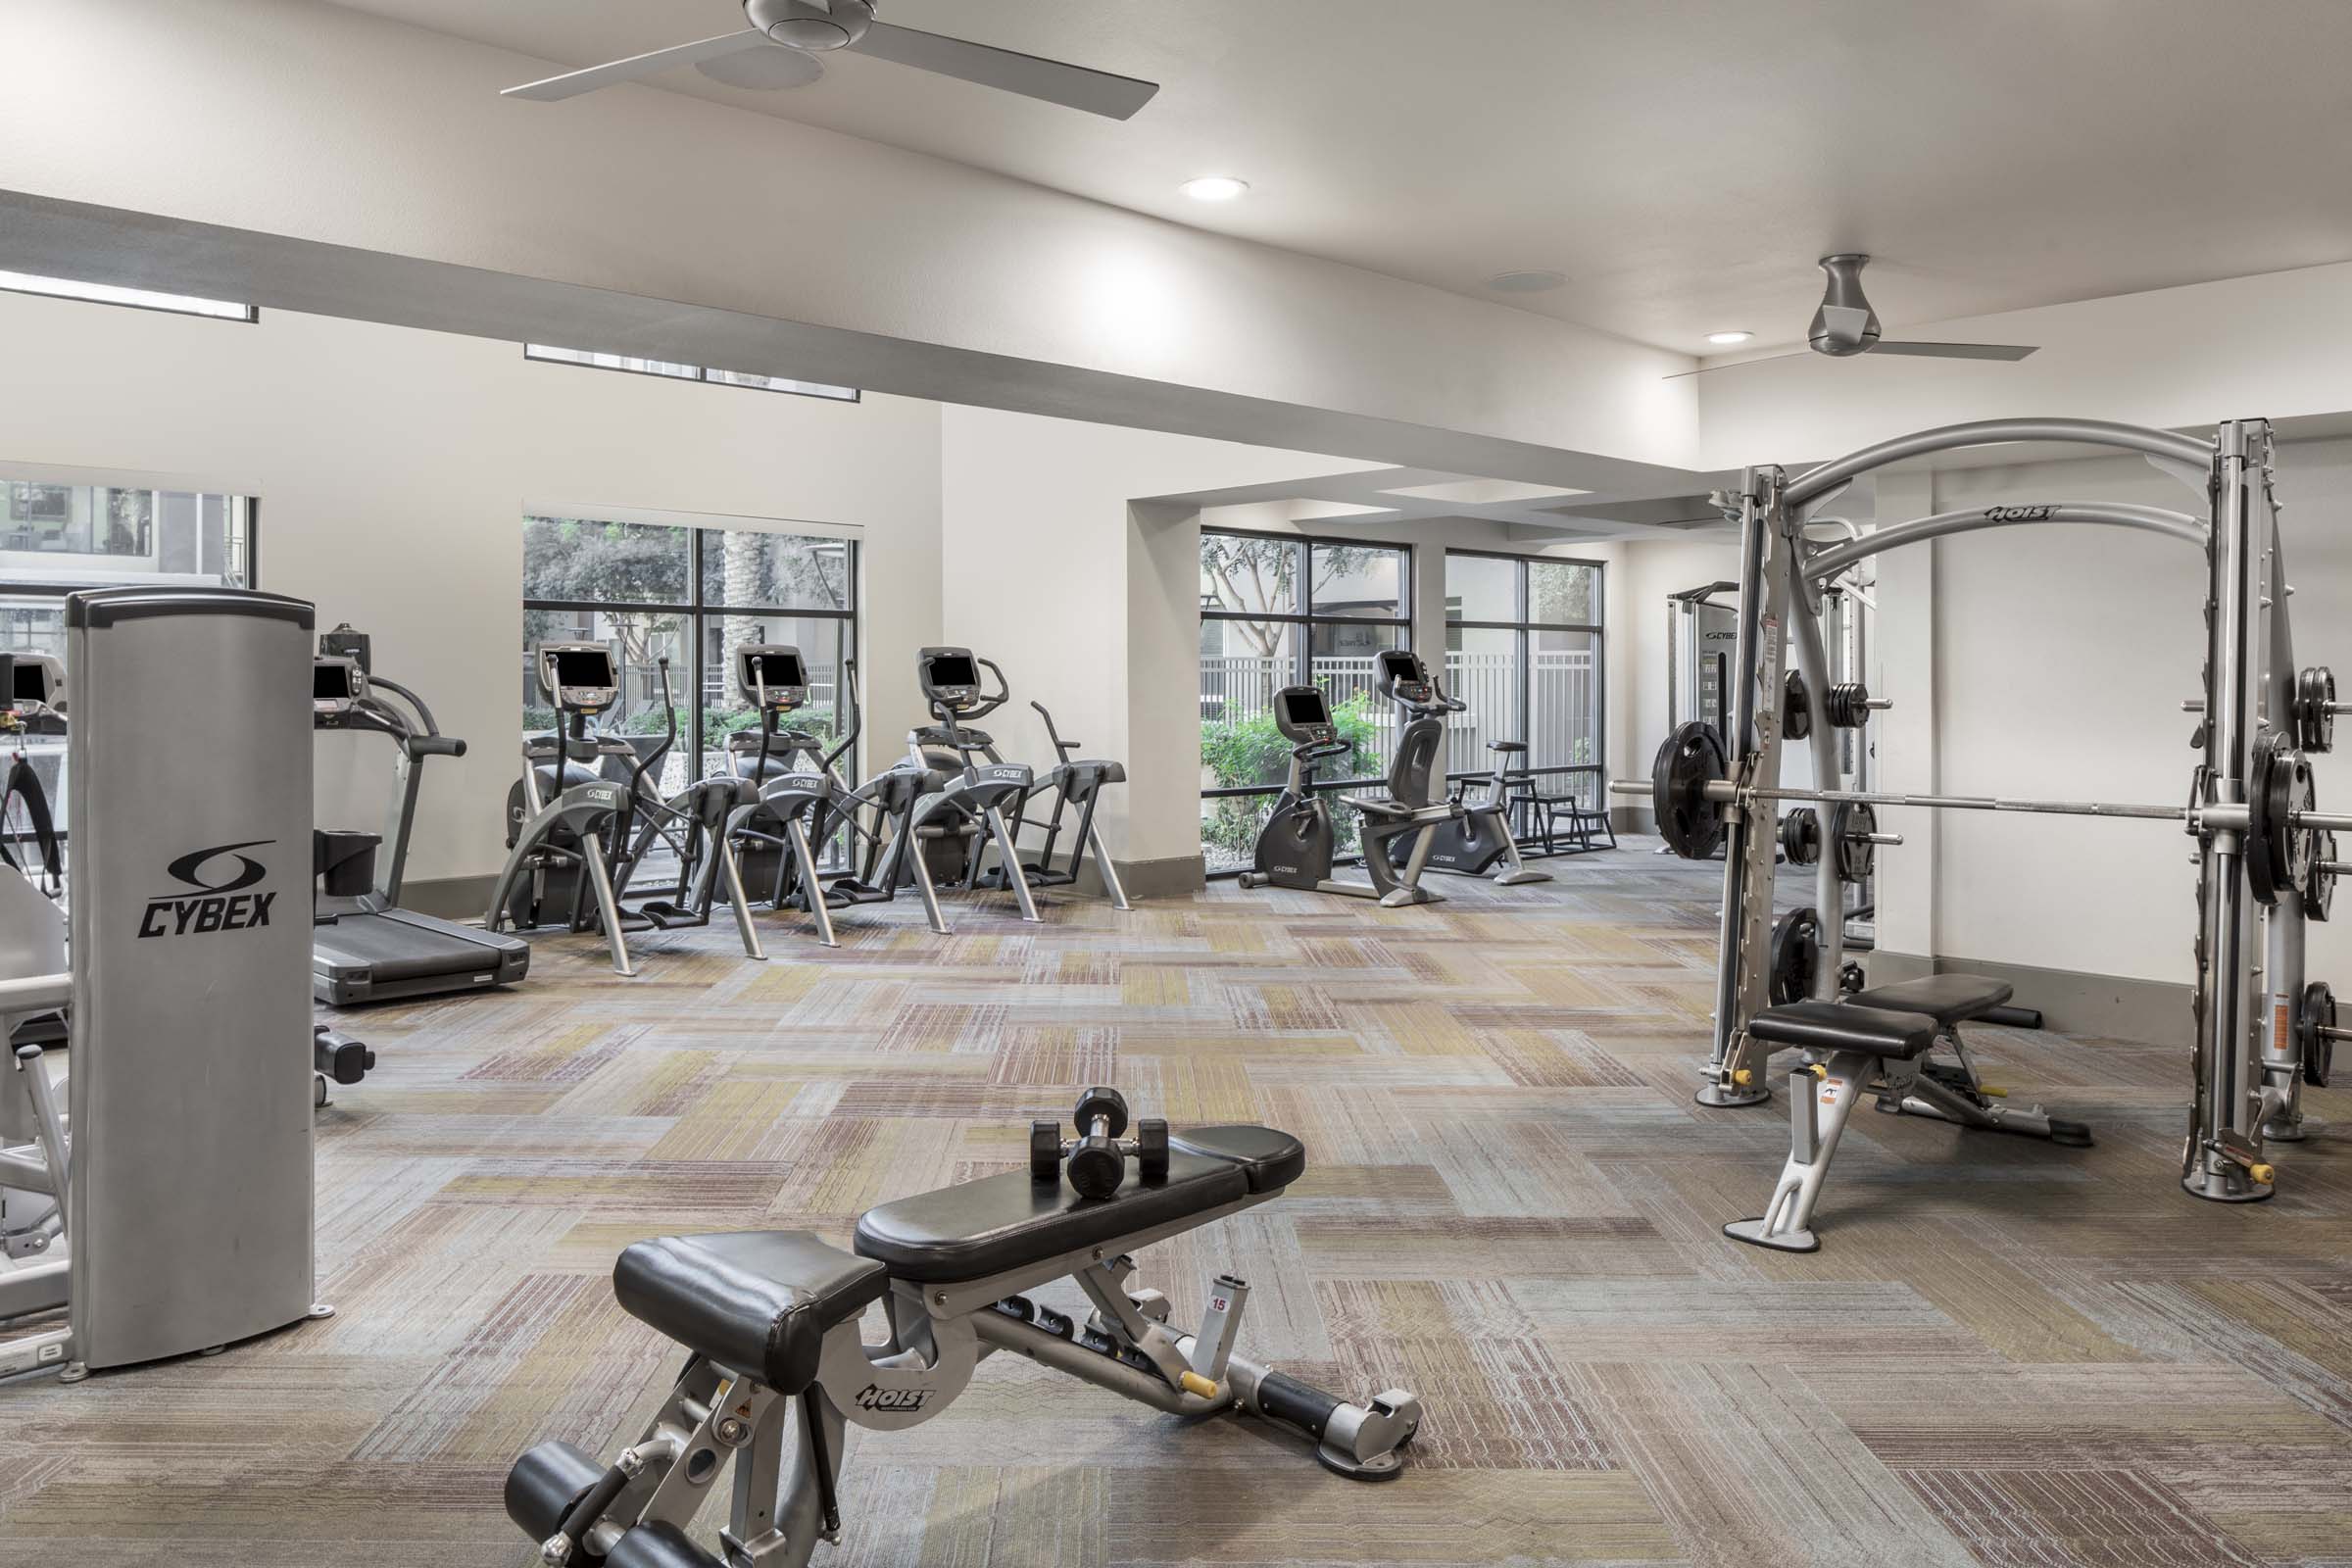 Camden Tempe Apartments Tempe Arizona 24-Hour Fitness Center with Dumbbells, Strength Training Machines, and Cardio with Floor to Ceiling Windows